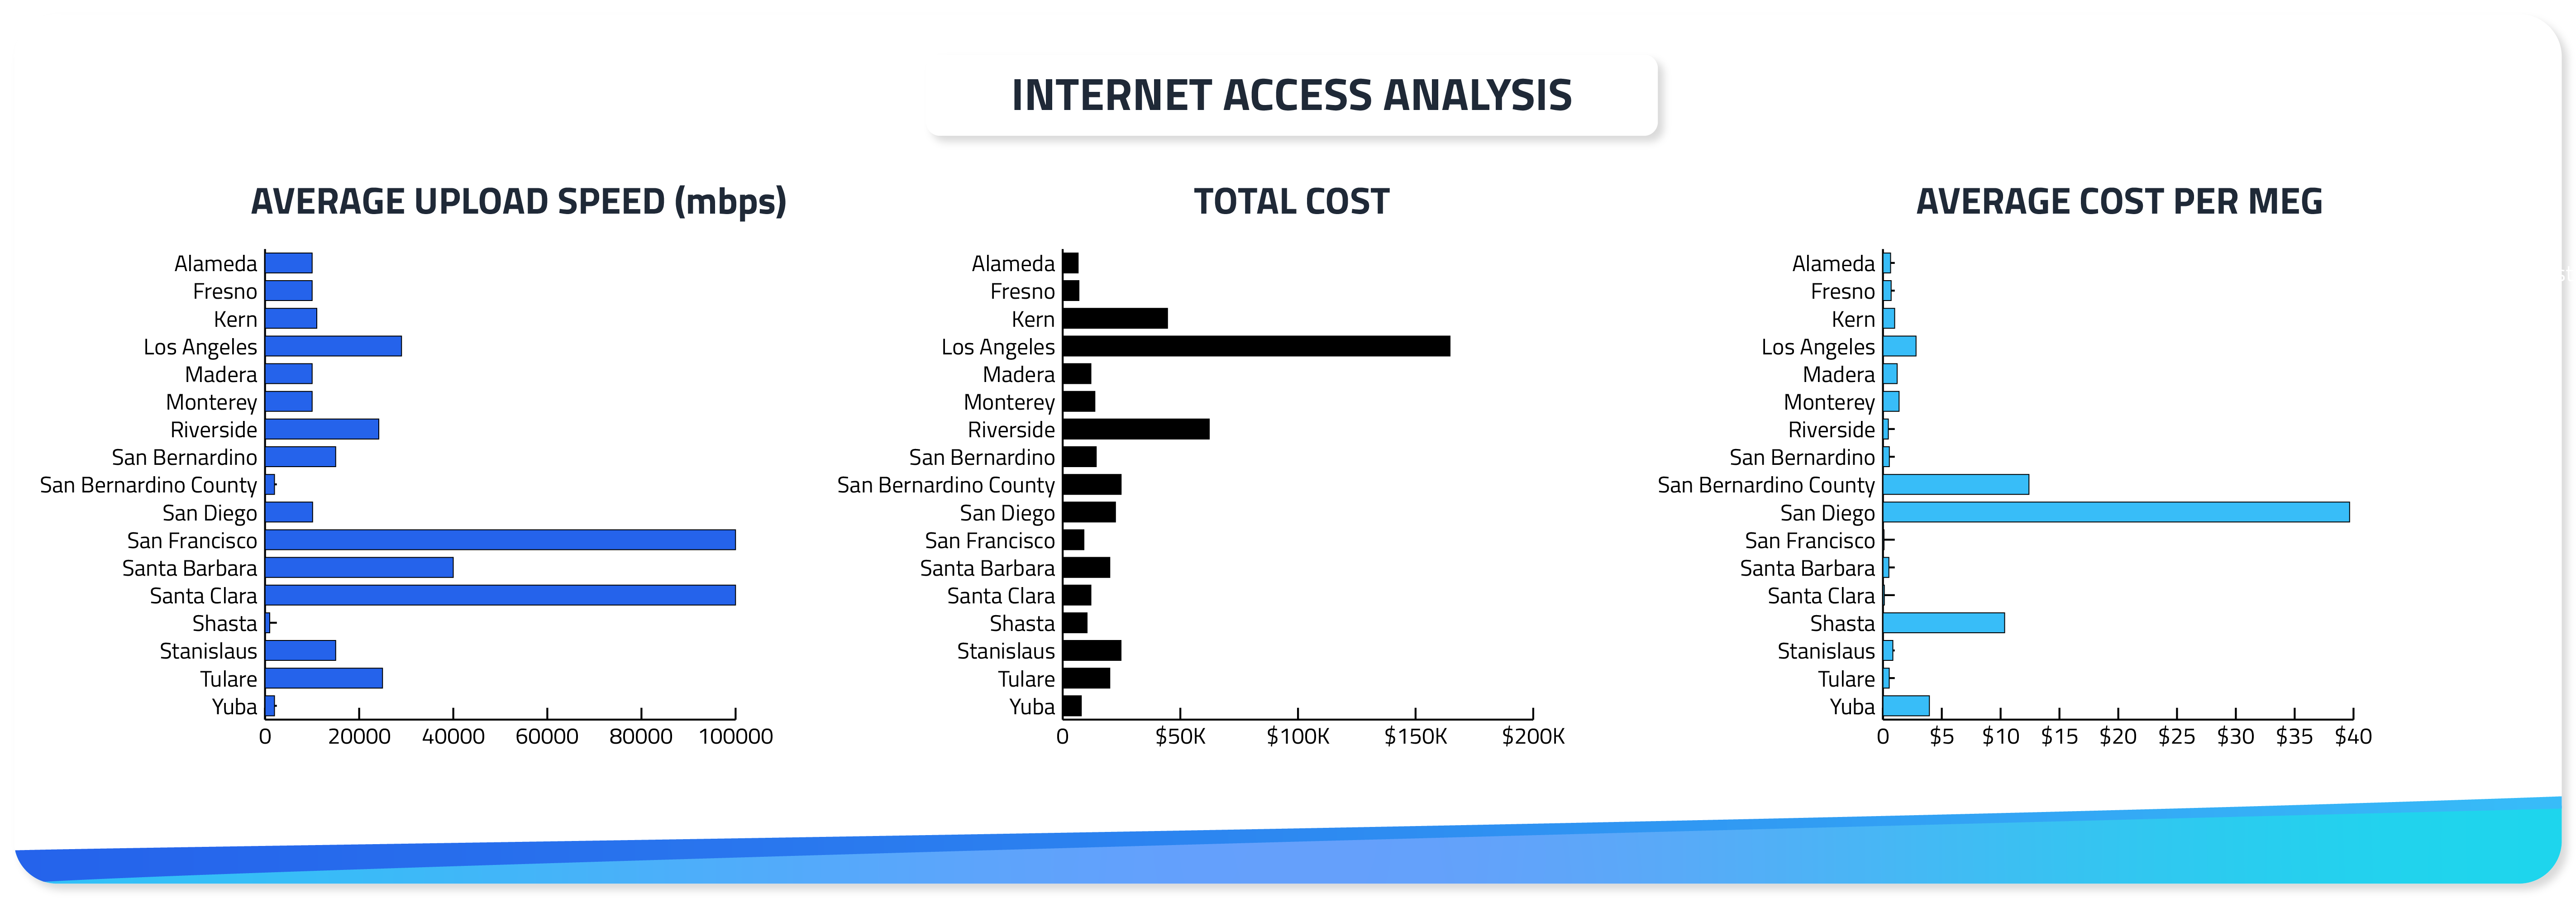 Internet Access services across California counties